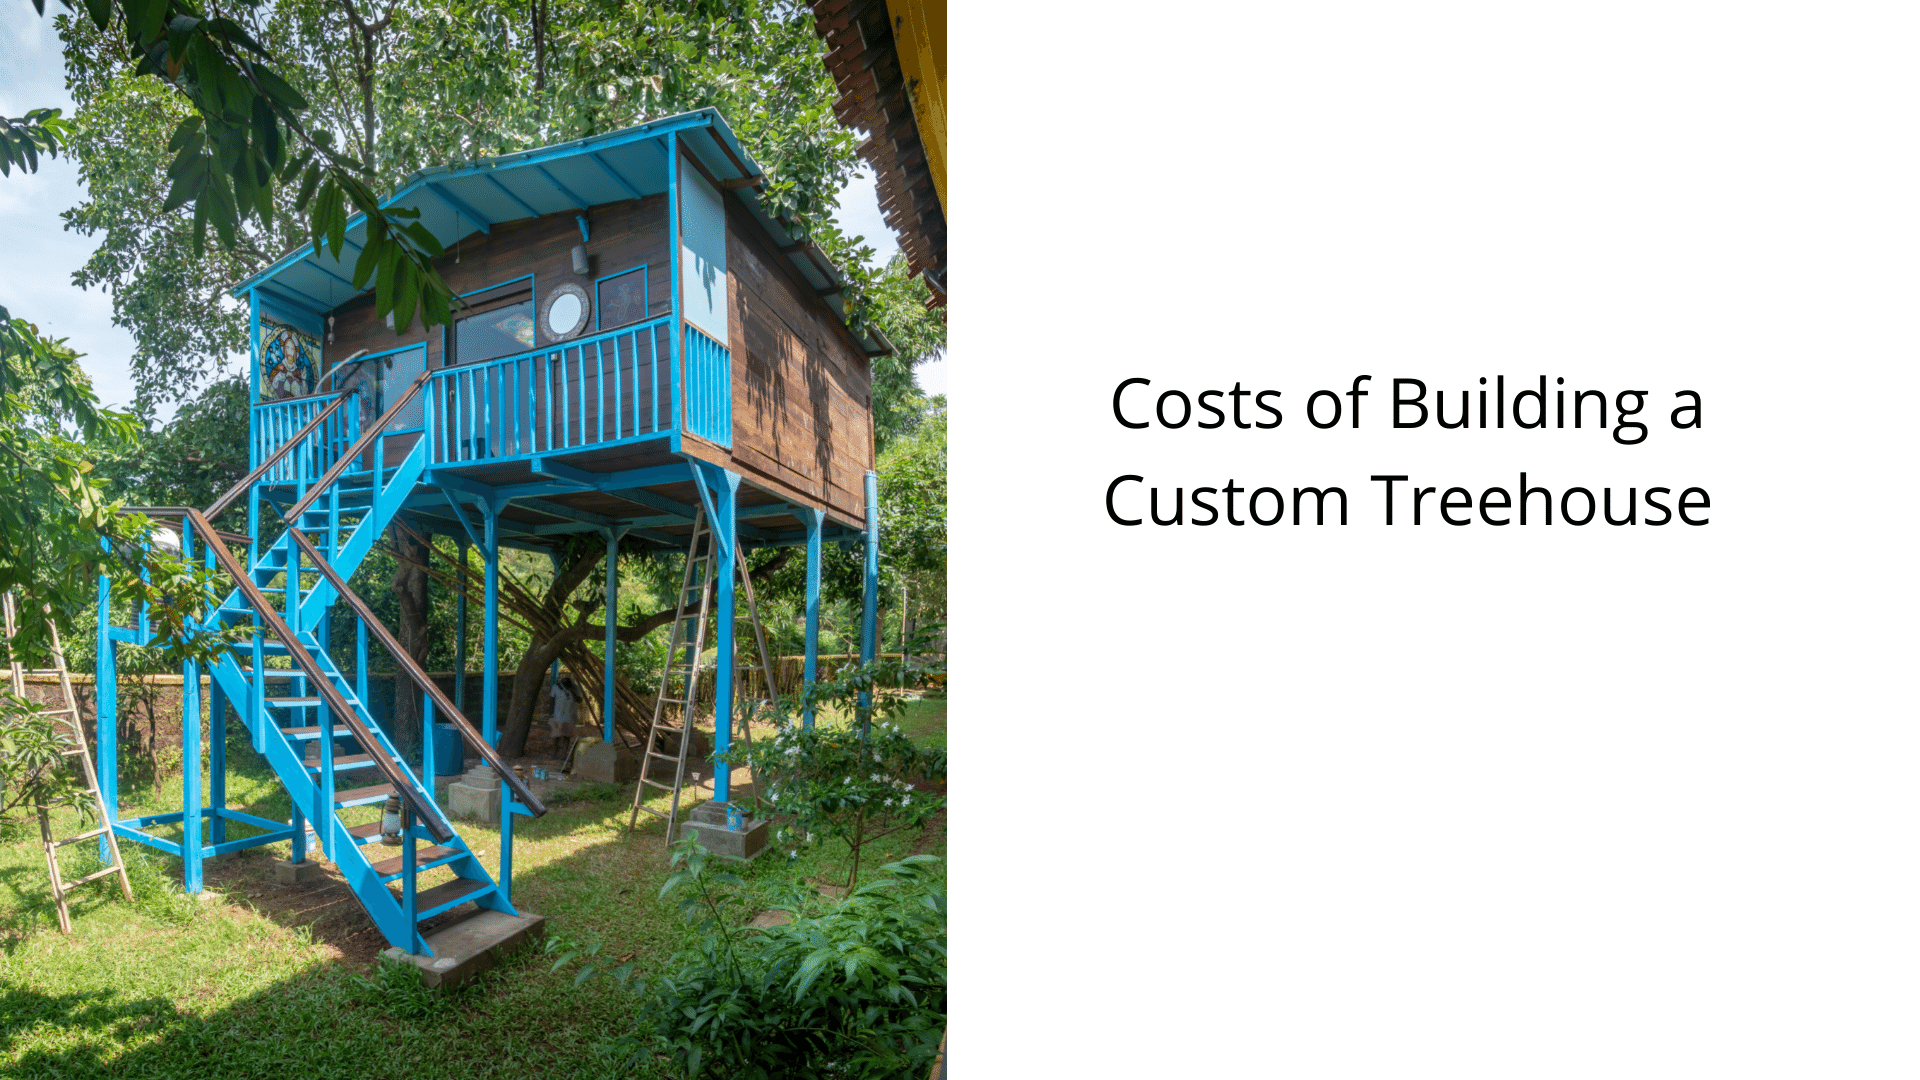 Costs of Building a Custom Treehouse